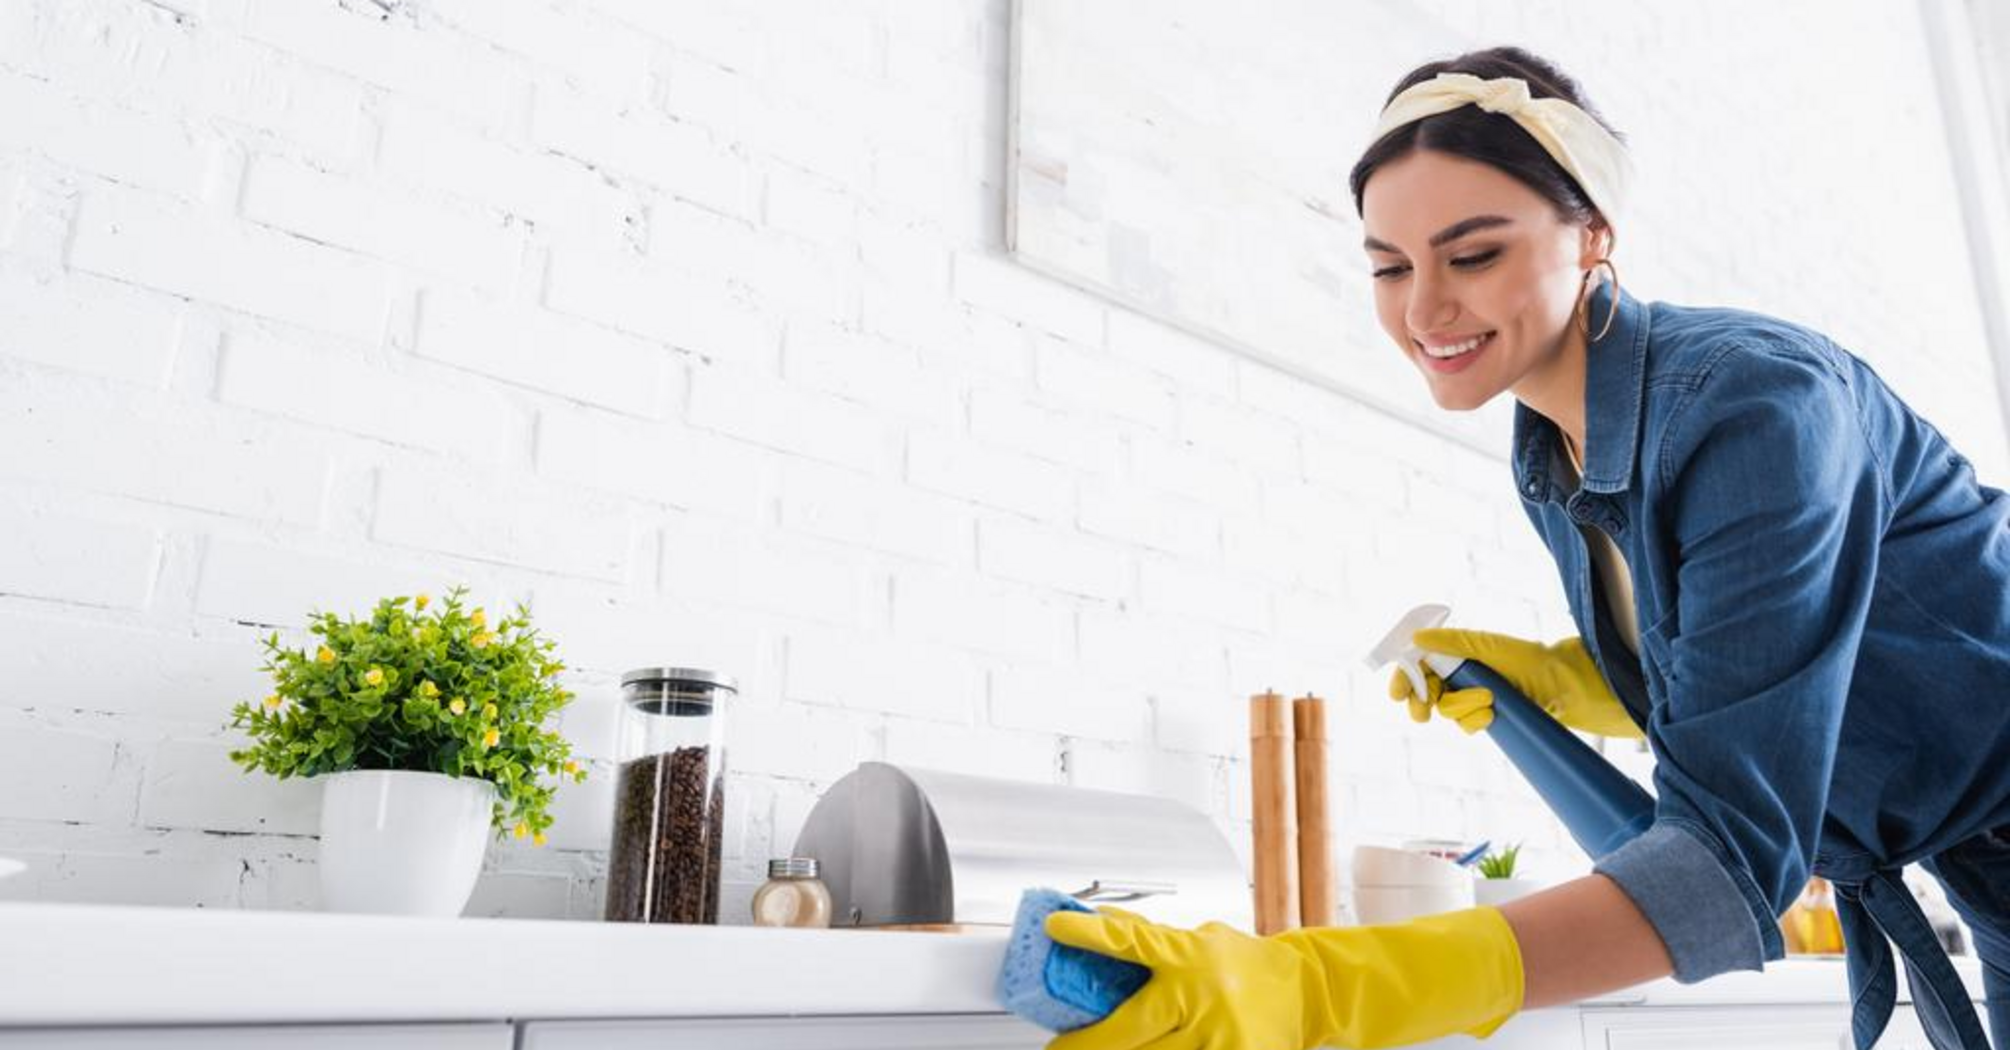 How to maintain cleanliness in the kitchen: 4 simple tips